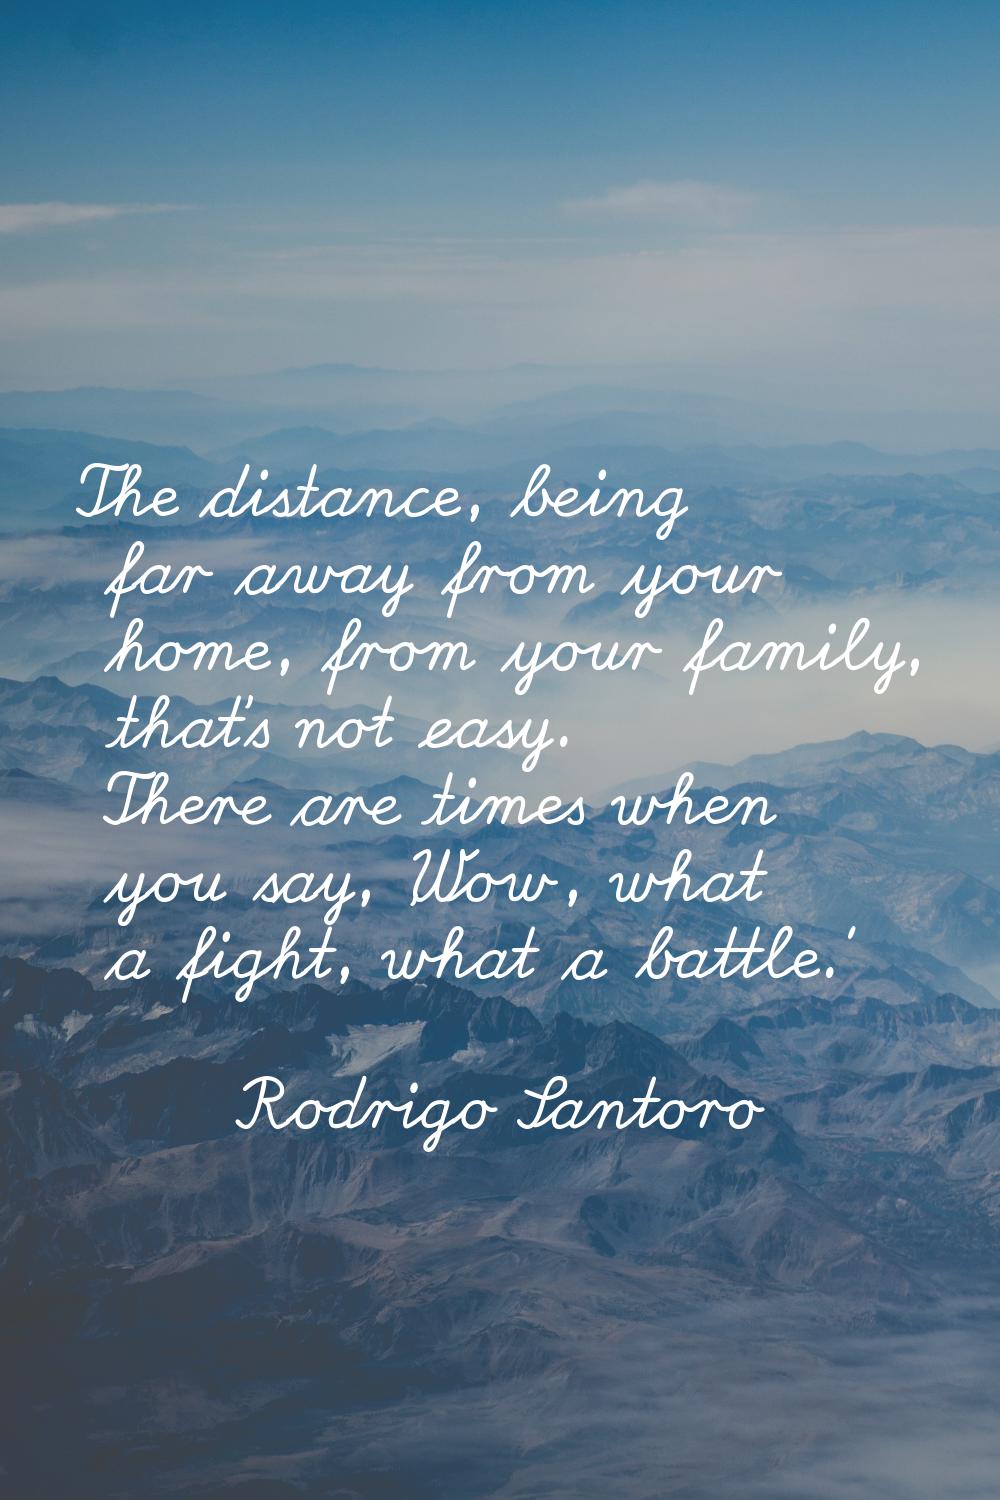 The distance, being far away from your home, from your family, that's not easy. There are times whe